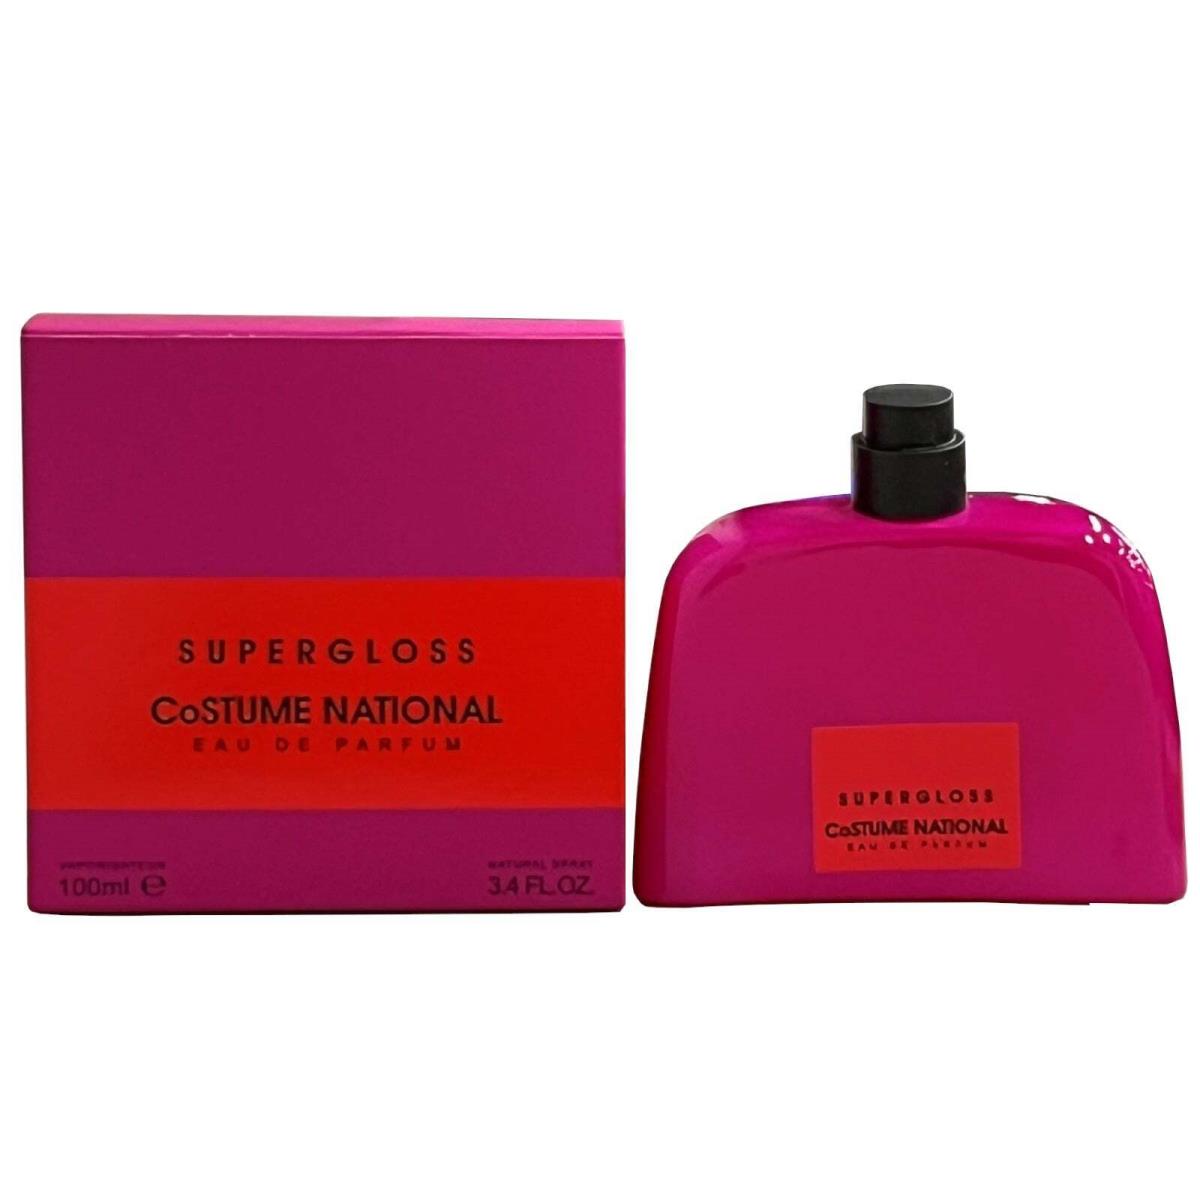 Supergloss by Costume National Perfume For Women Edp 3.3 /3.4 oz